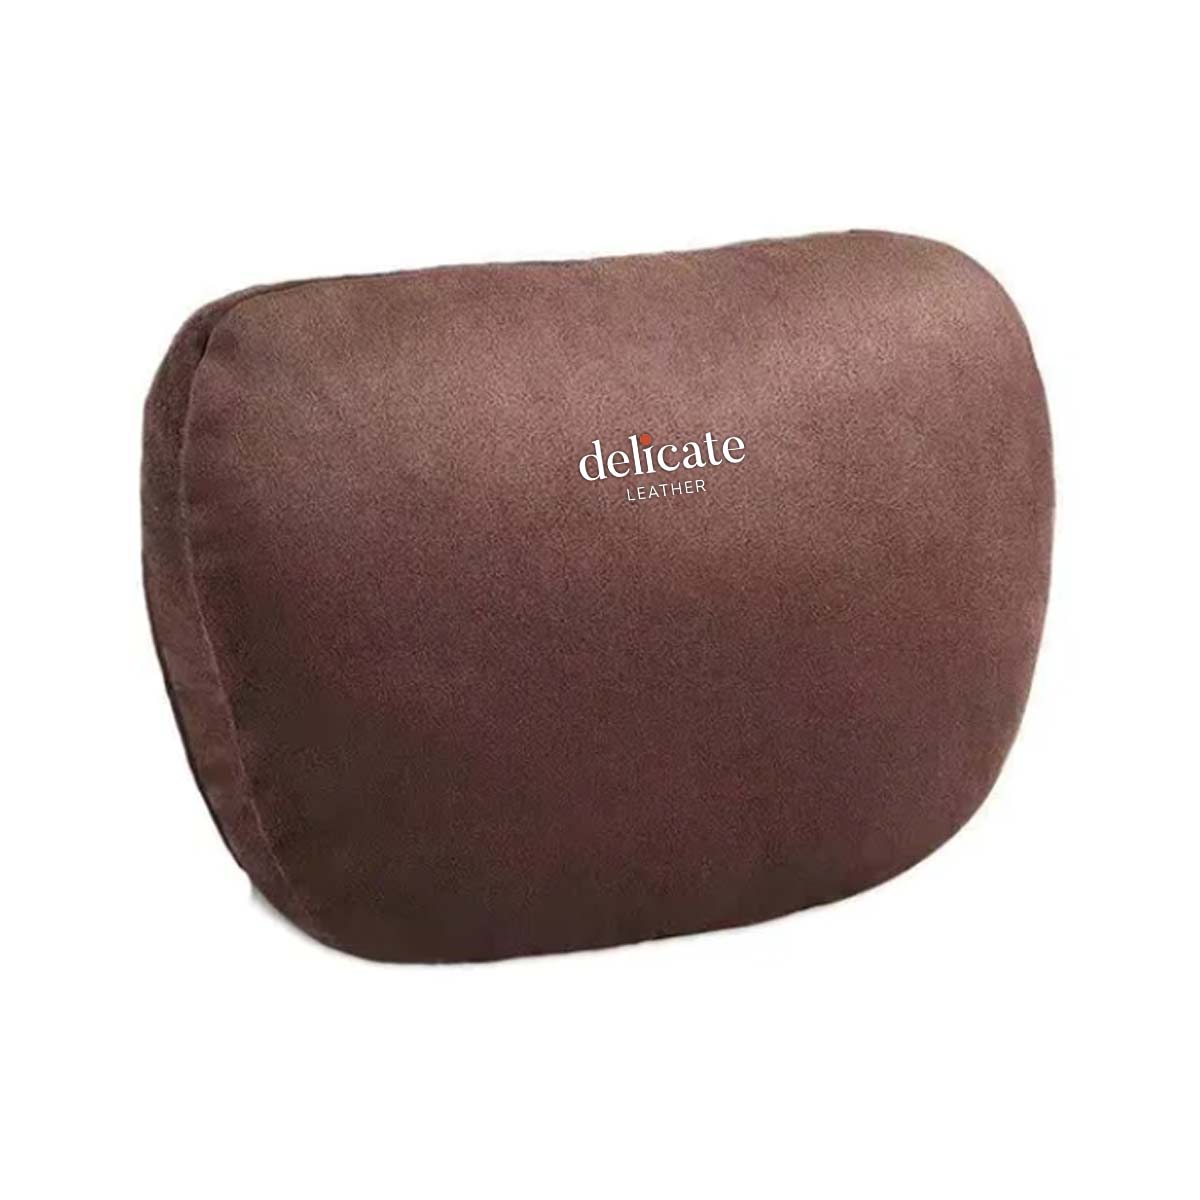 High-Quality Car Headrest Neck Support Seat Class: Soft, Universal, and Adjustable Car Pillow Neck Rest Cushion for Superior Comfort - Delicate Leather